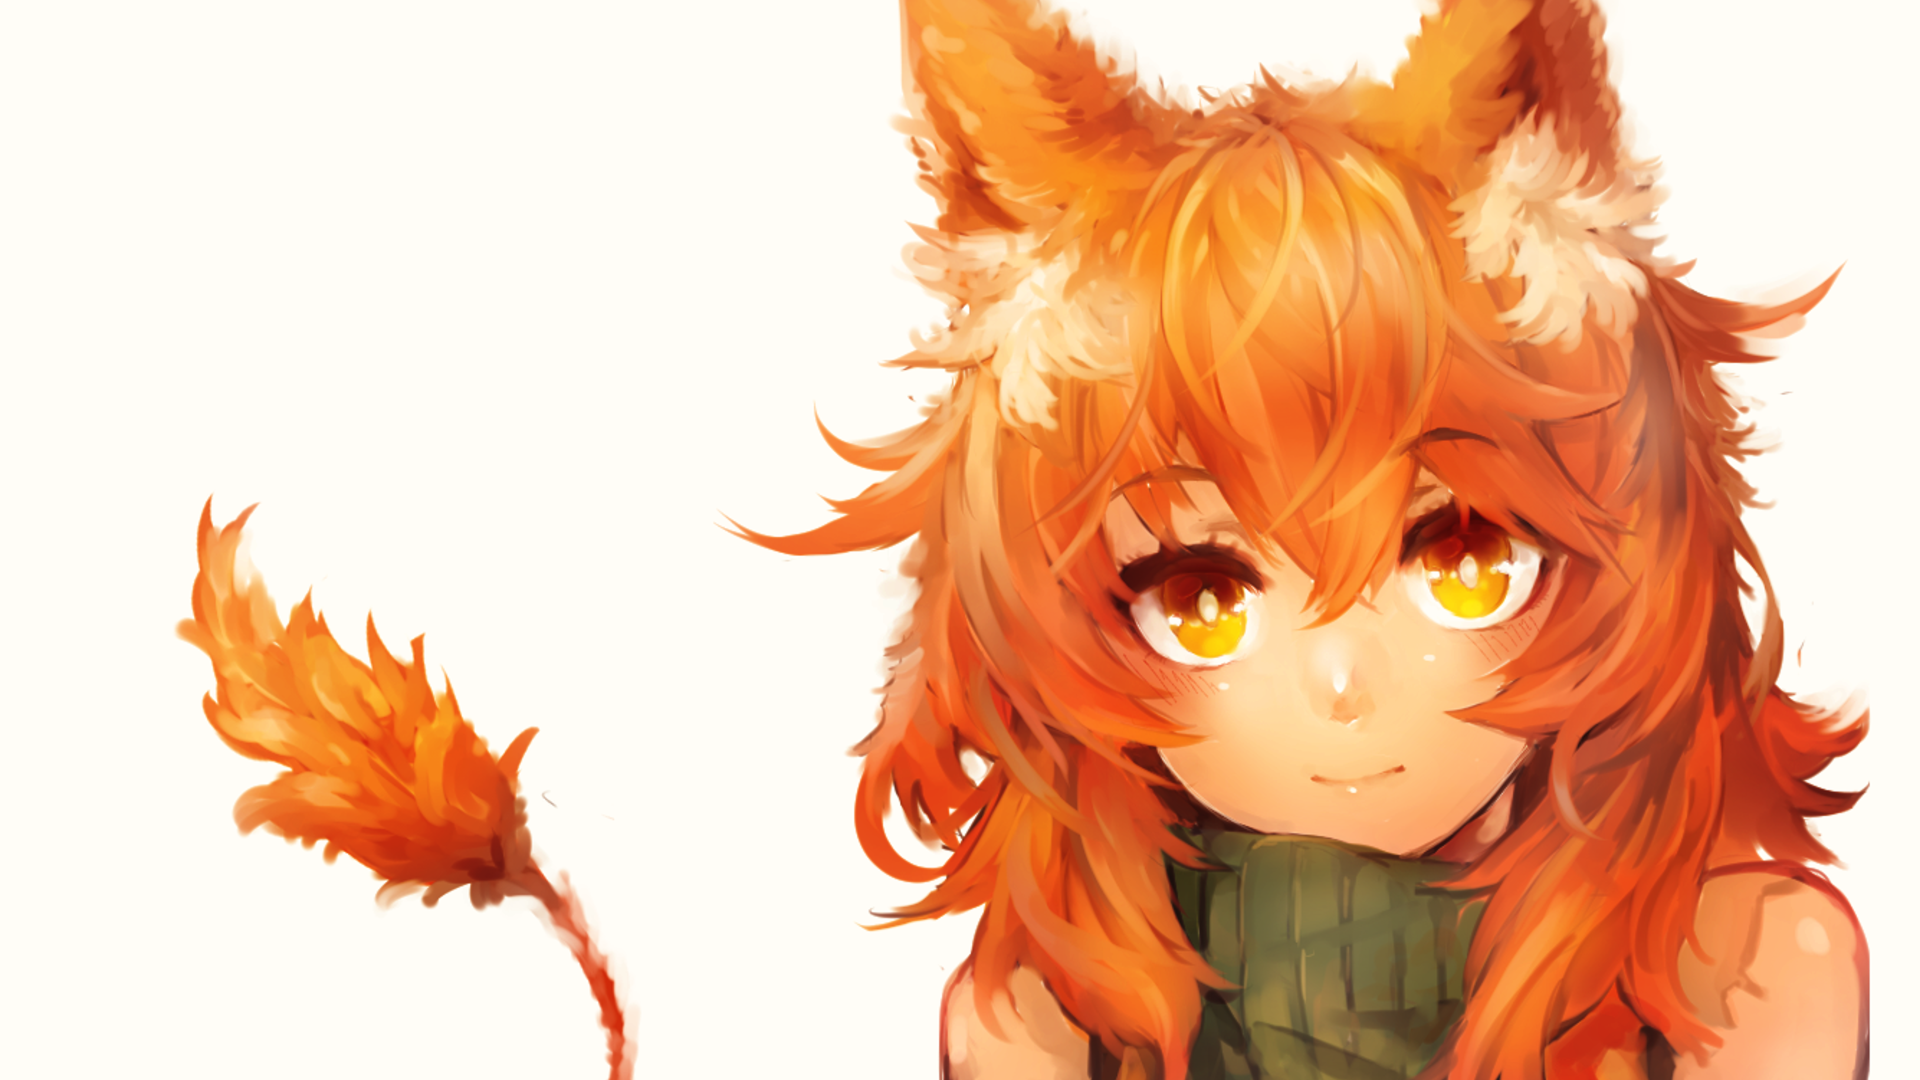 Download 1920x1080 Red Haired Cat Girl Anime Kemonomimi Wallpaper